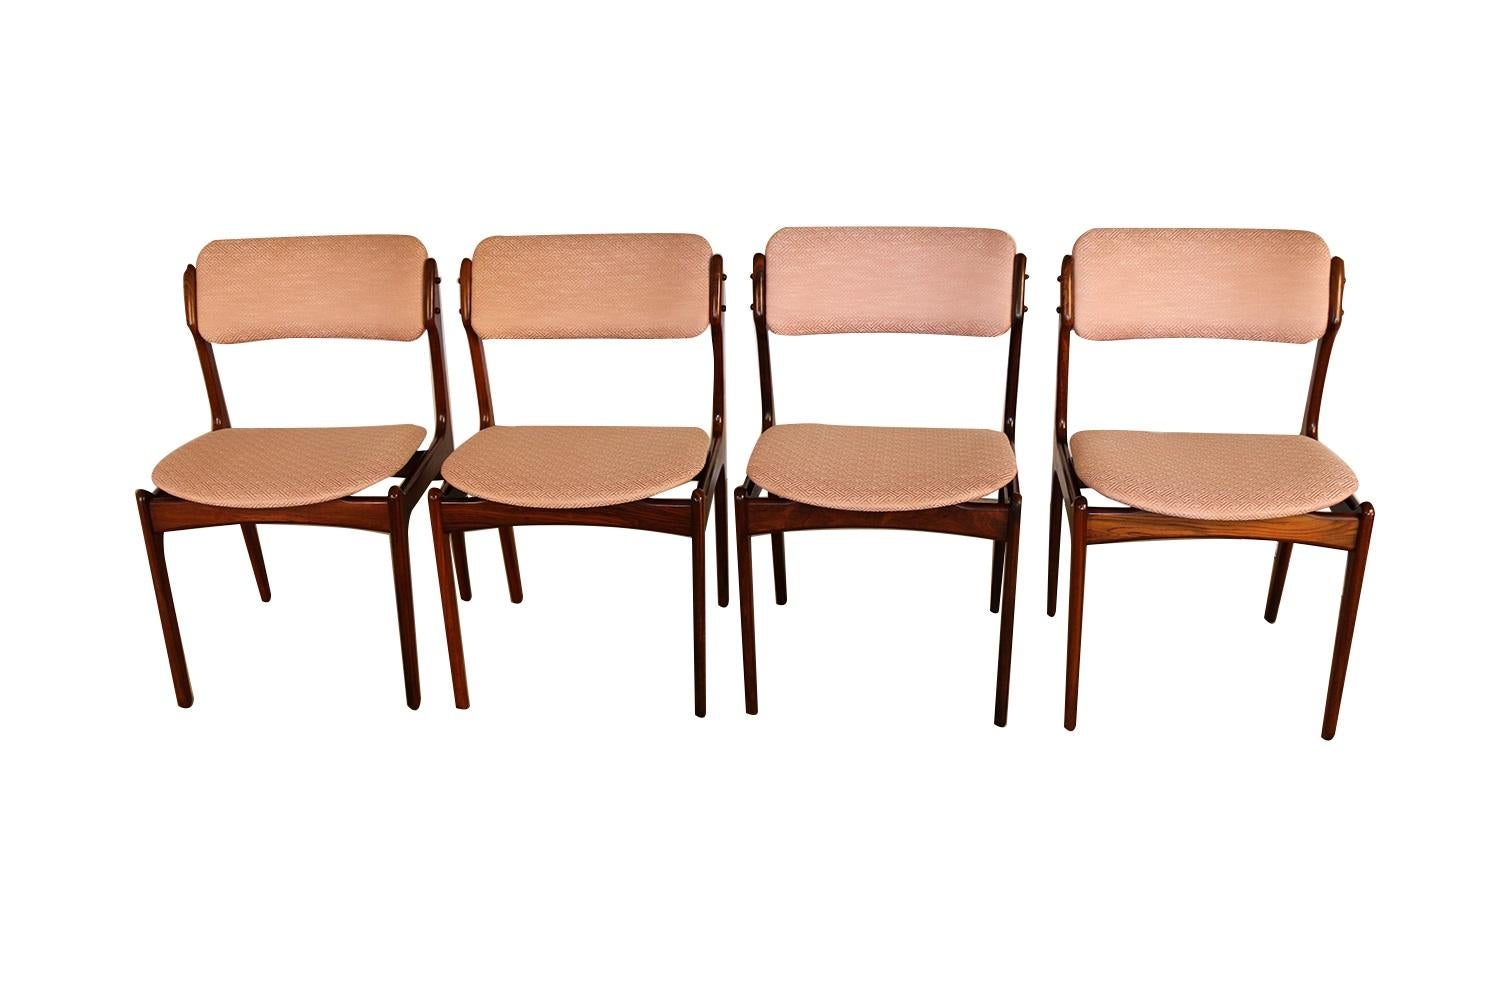 Beautiful set of 6 modern rosewood dining chairs by famous Scandinavian designer Erik Buch for Oddense Maskinsnedkeri/ O.D. Mobler, circa 1950s. Buch’s organic and functional aesthetic are showcased in these superbly crafted modern rosewood dining